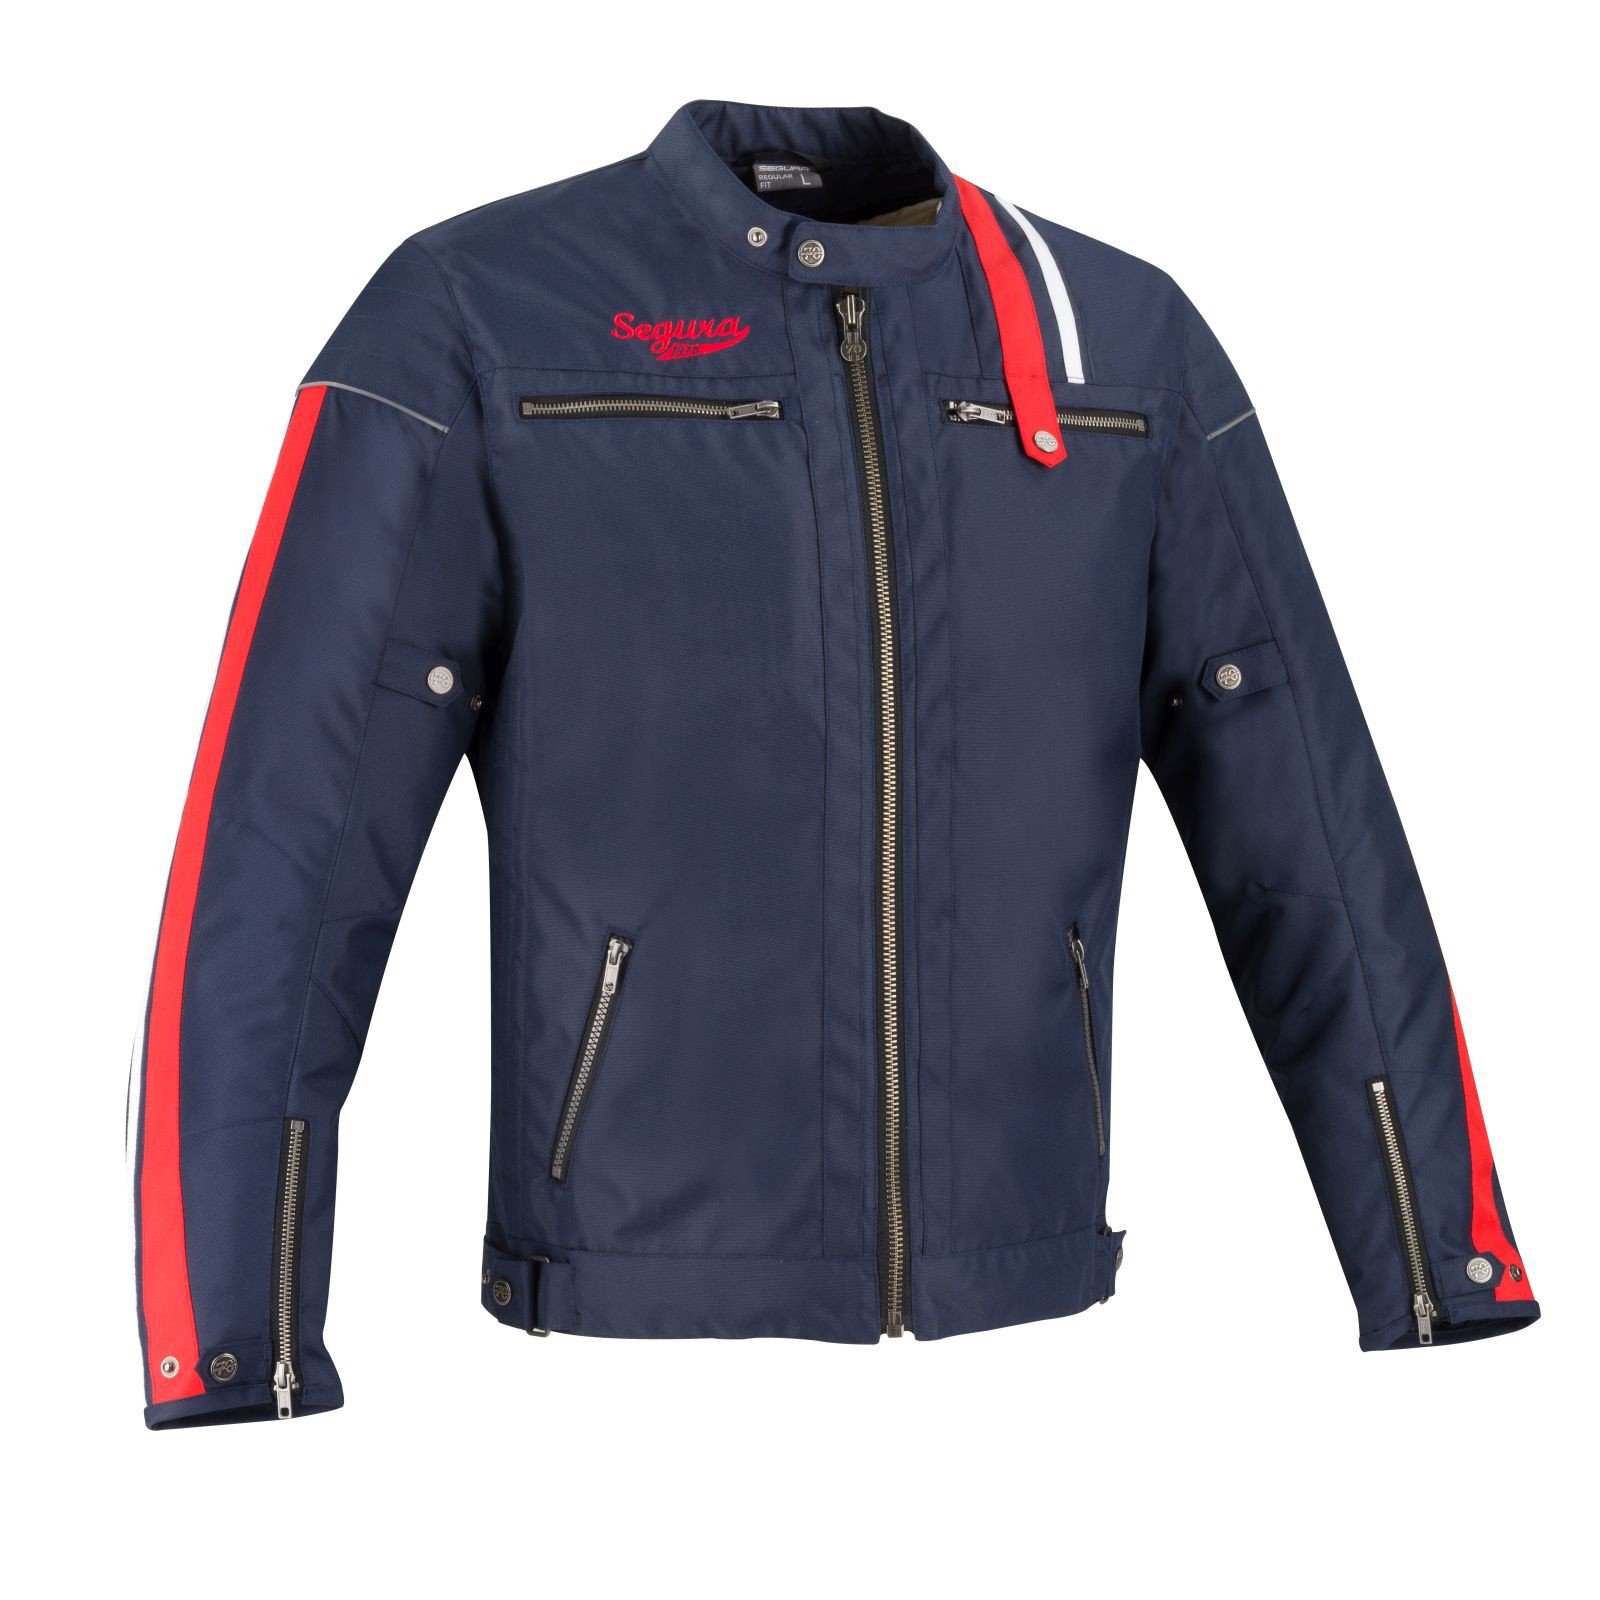 Image of Segura Brooster Jacket Navy Red White Size S ID 3660815146576